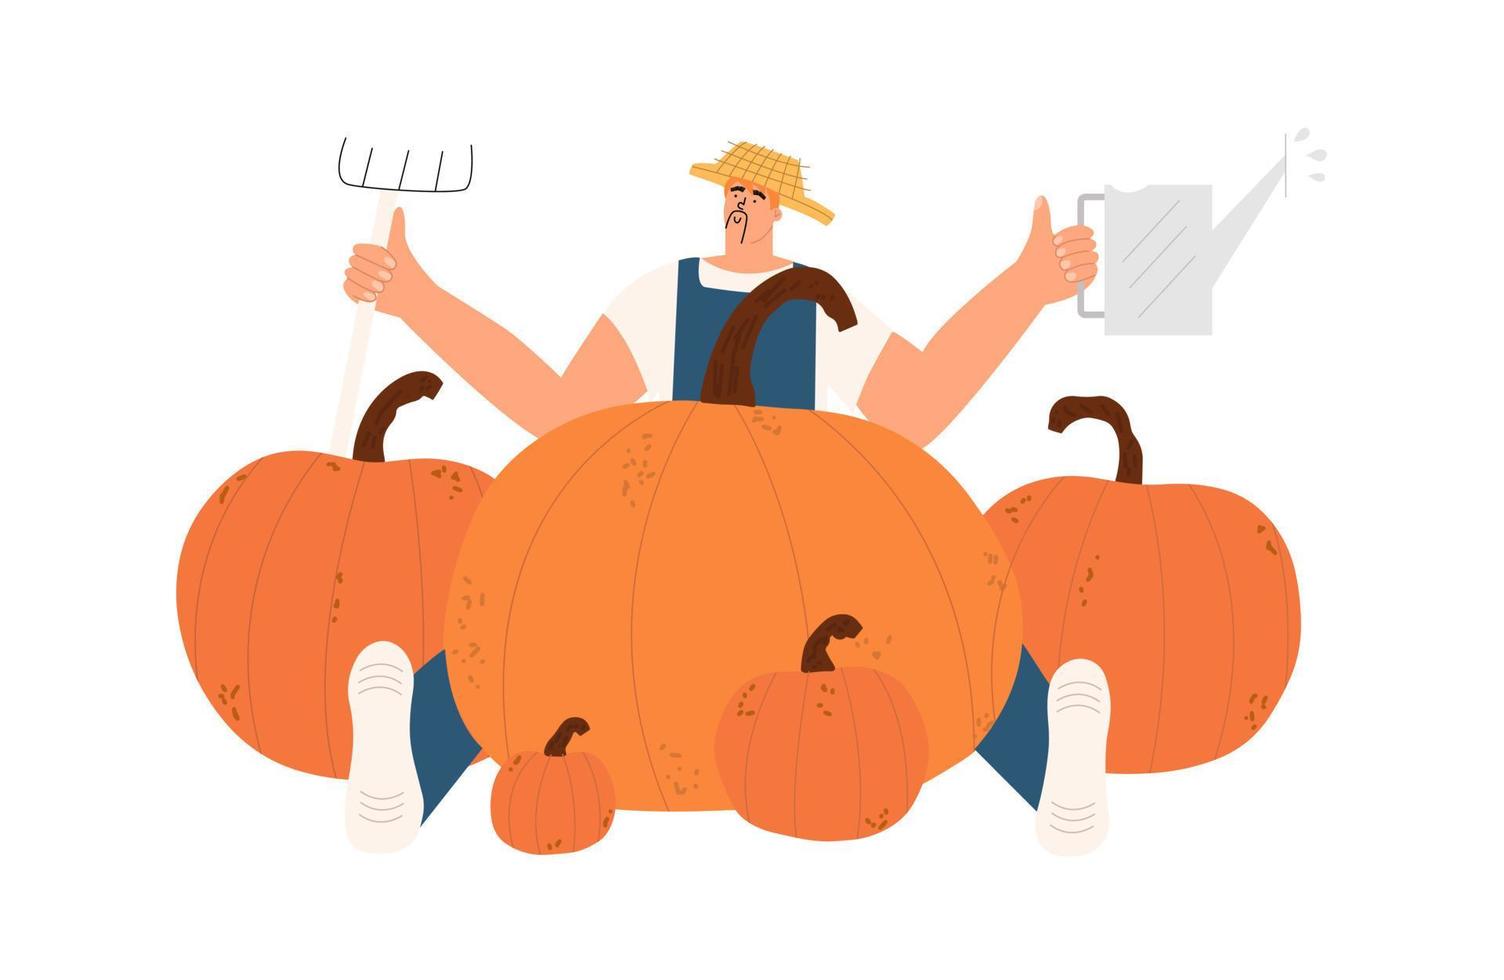 Farmer and pumpkin harvest. Vector illustration in hand drawn style